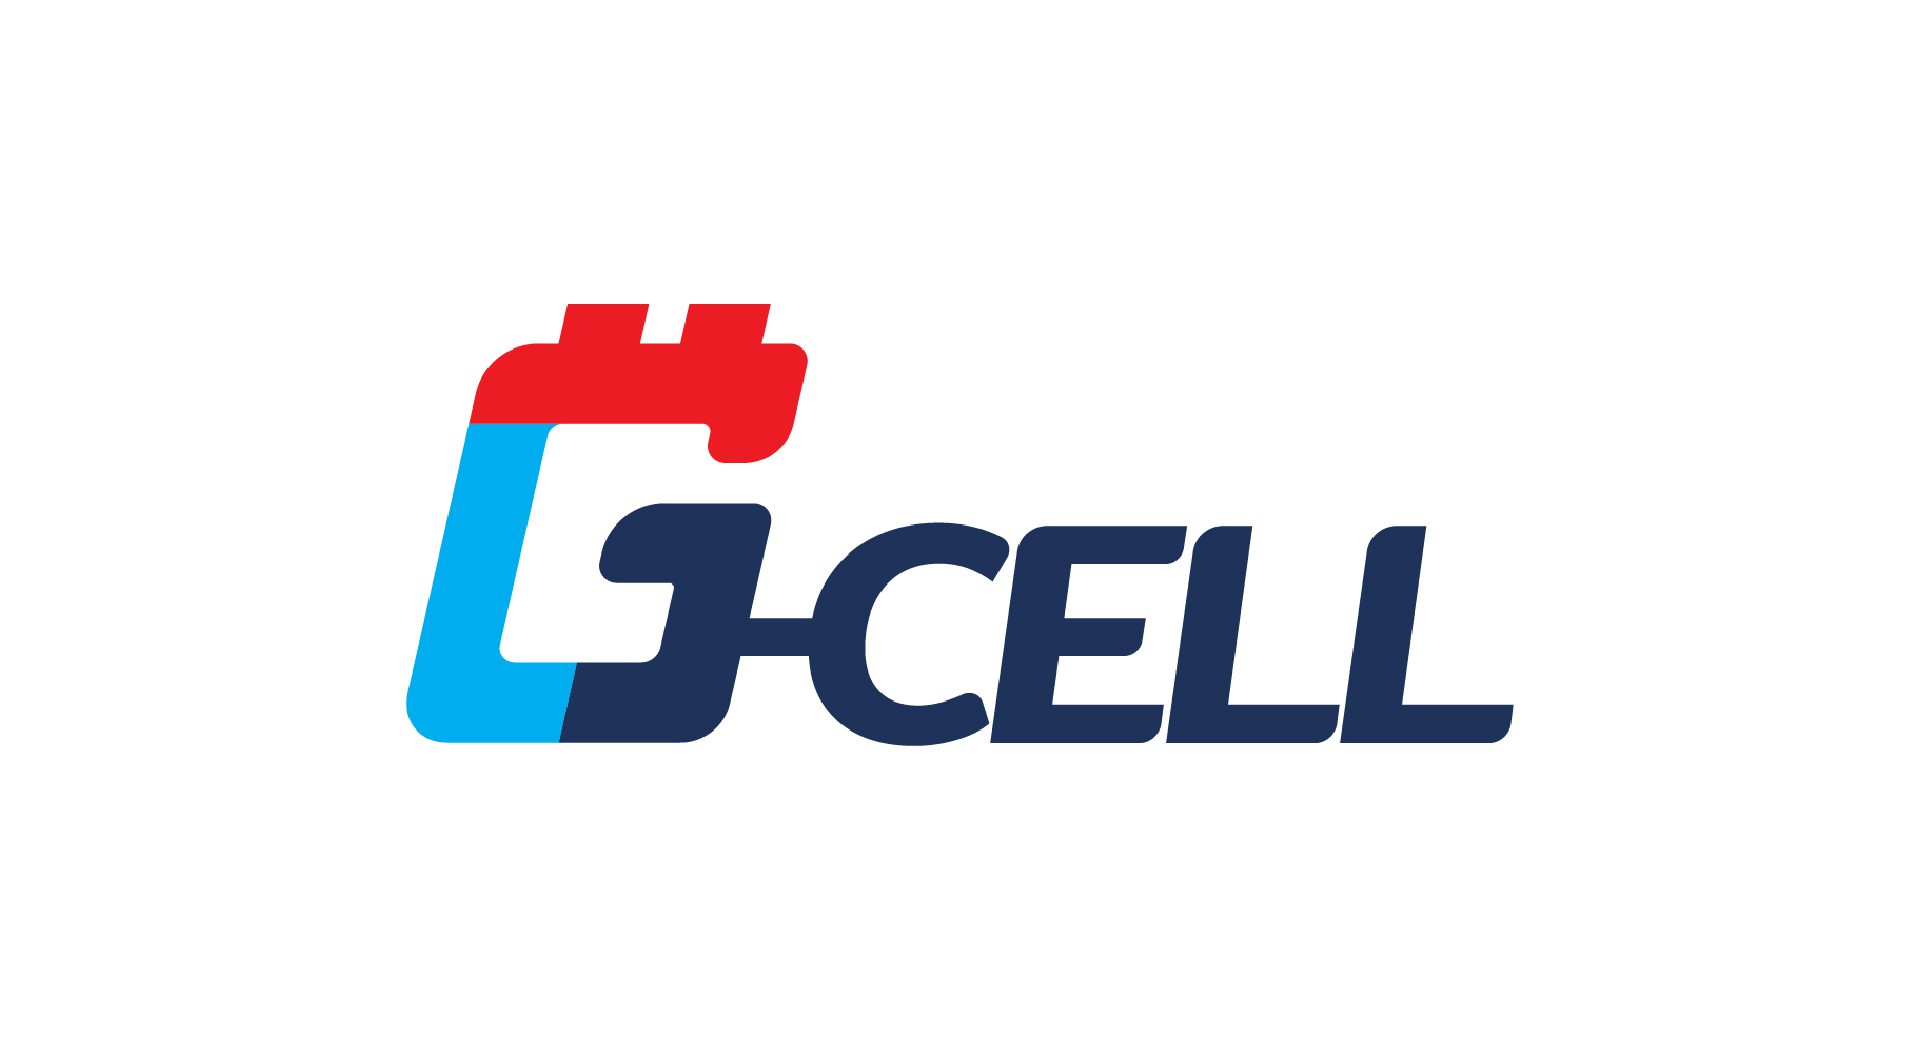 Producing and designing digital content on G-Cell website and Social Media Platform. Also to promote contents through Social Media.